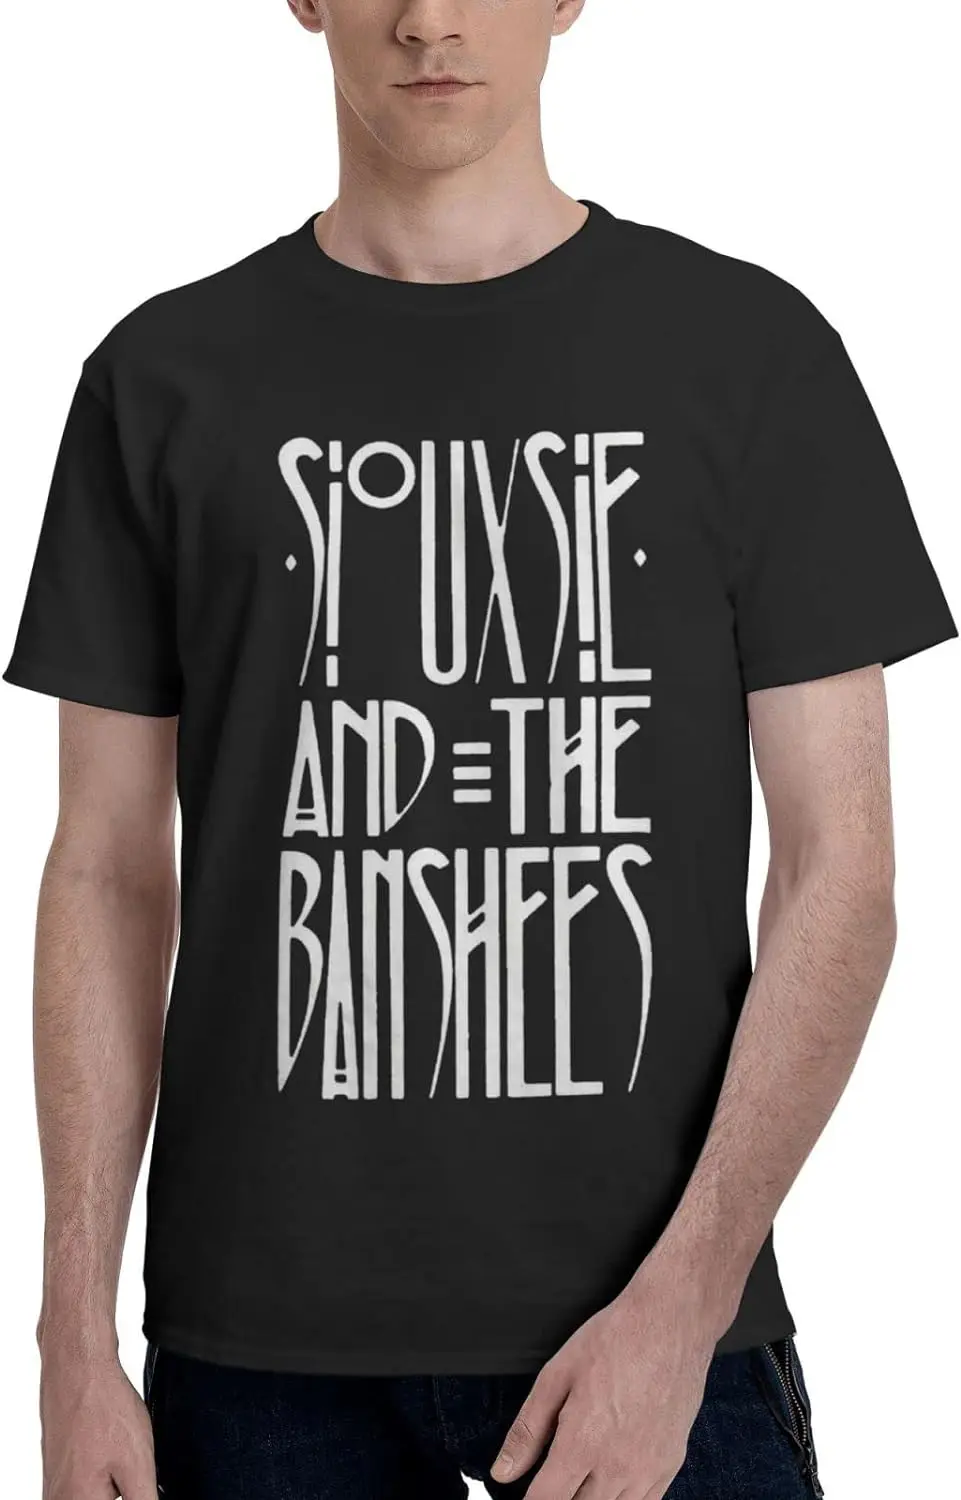 

Siouxsie and The Banshees Logo T Shirt Mens Summer Crew Neck Tops Casual Short Sleeve Tshirt